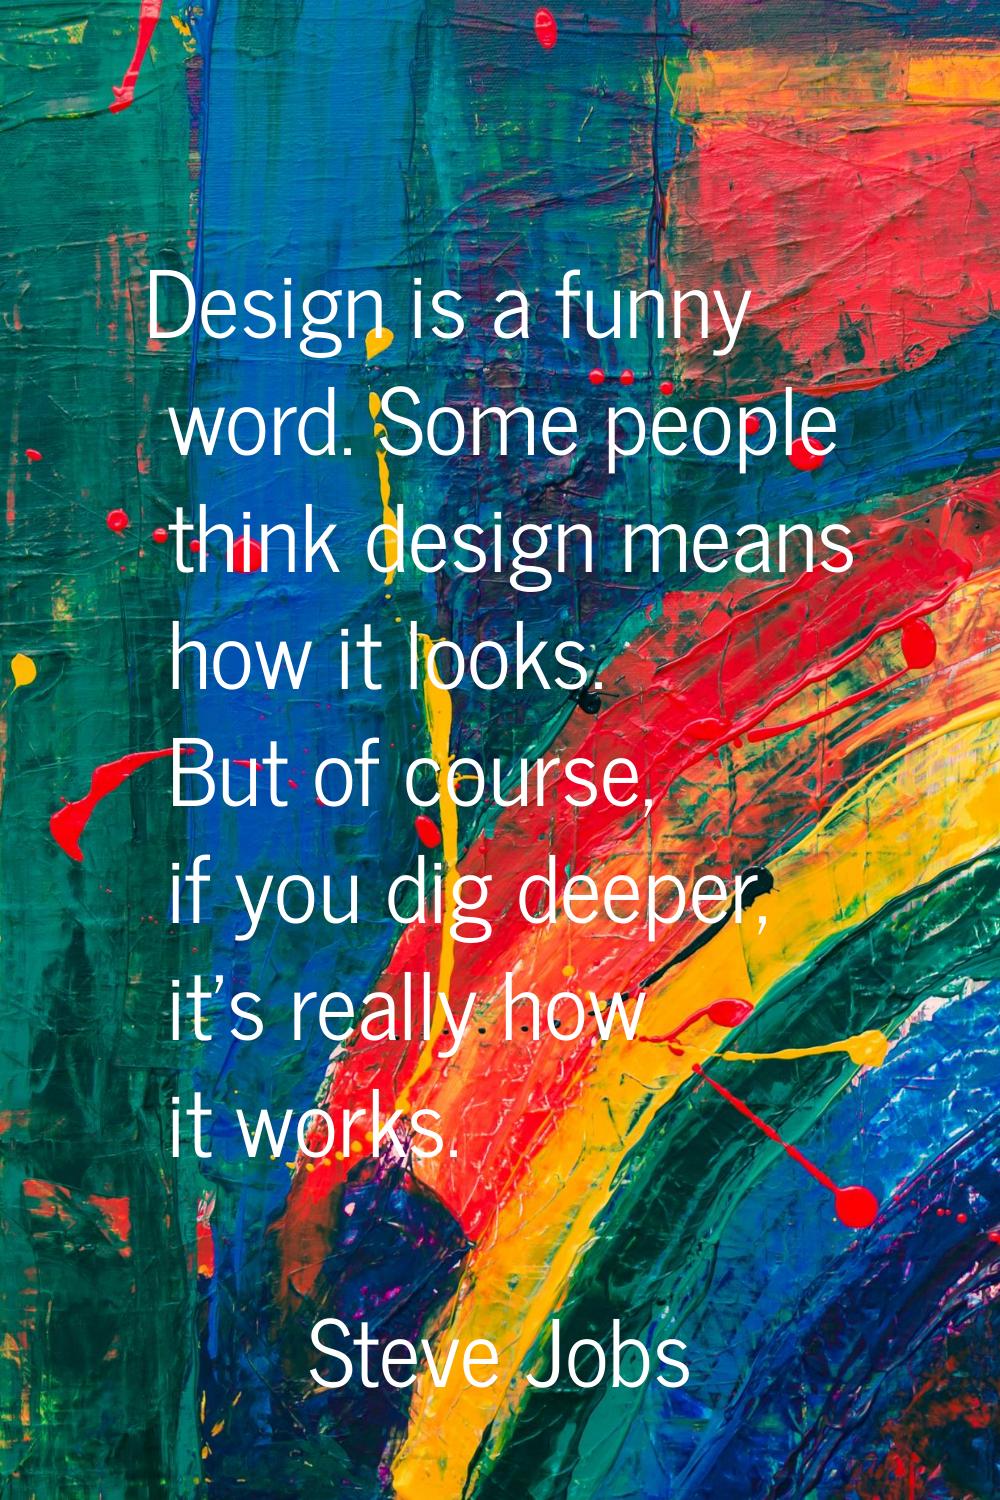 Design is a funny word. Some people think design means how it looks. But of course, if you dig deep